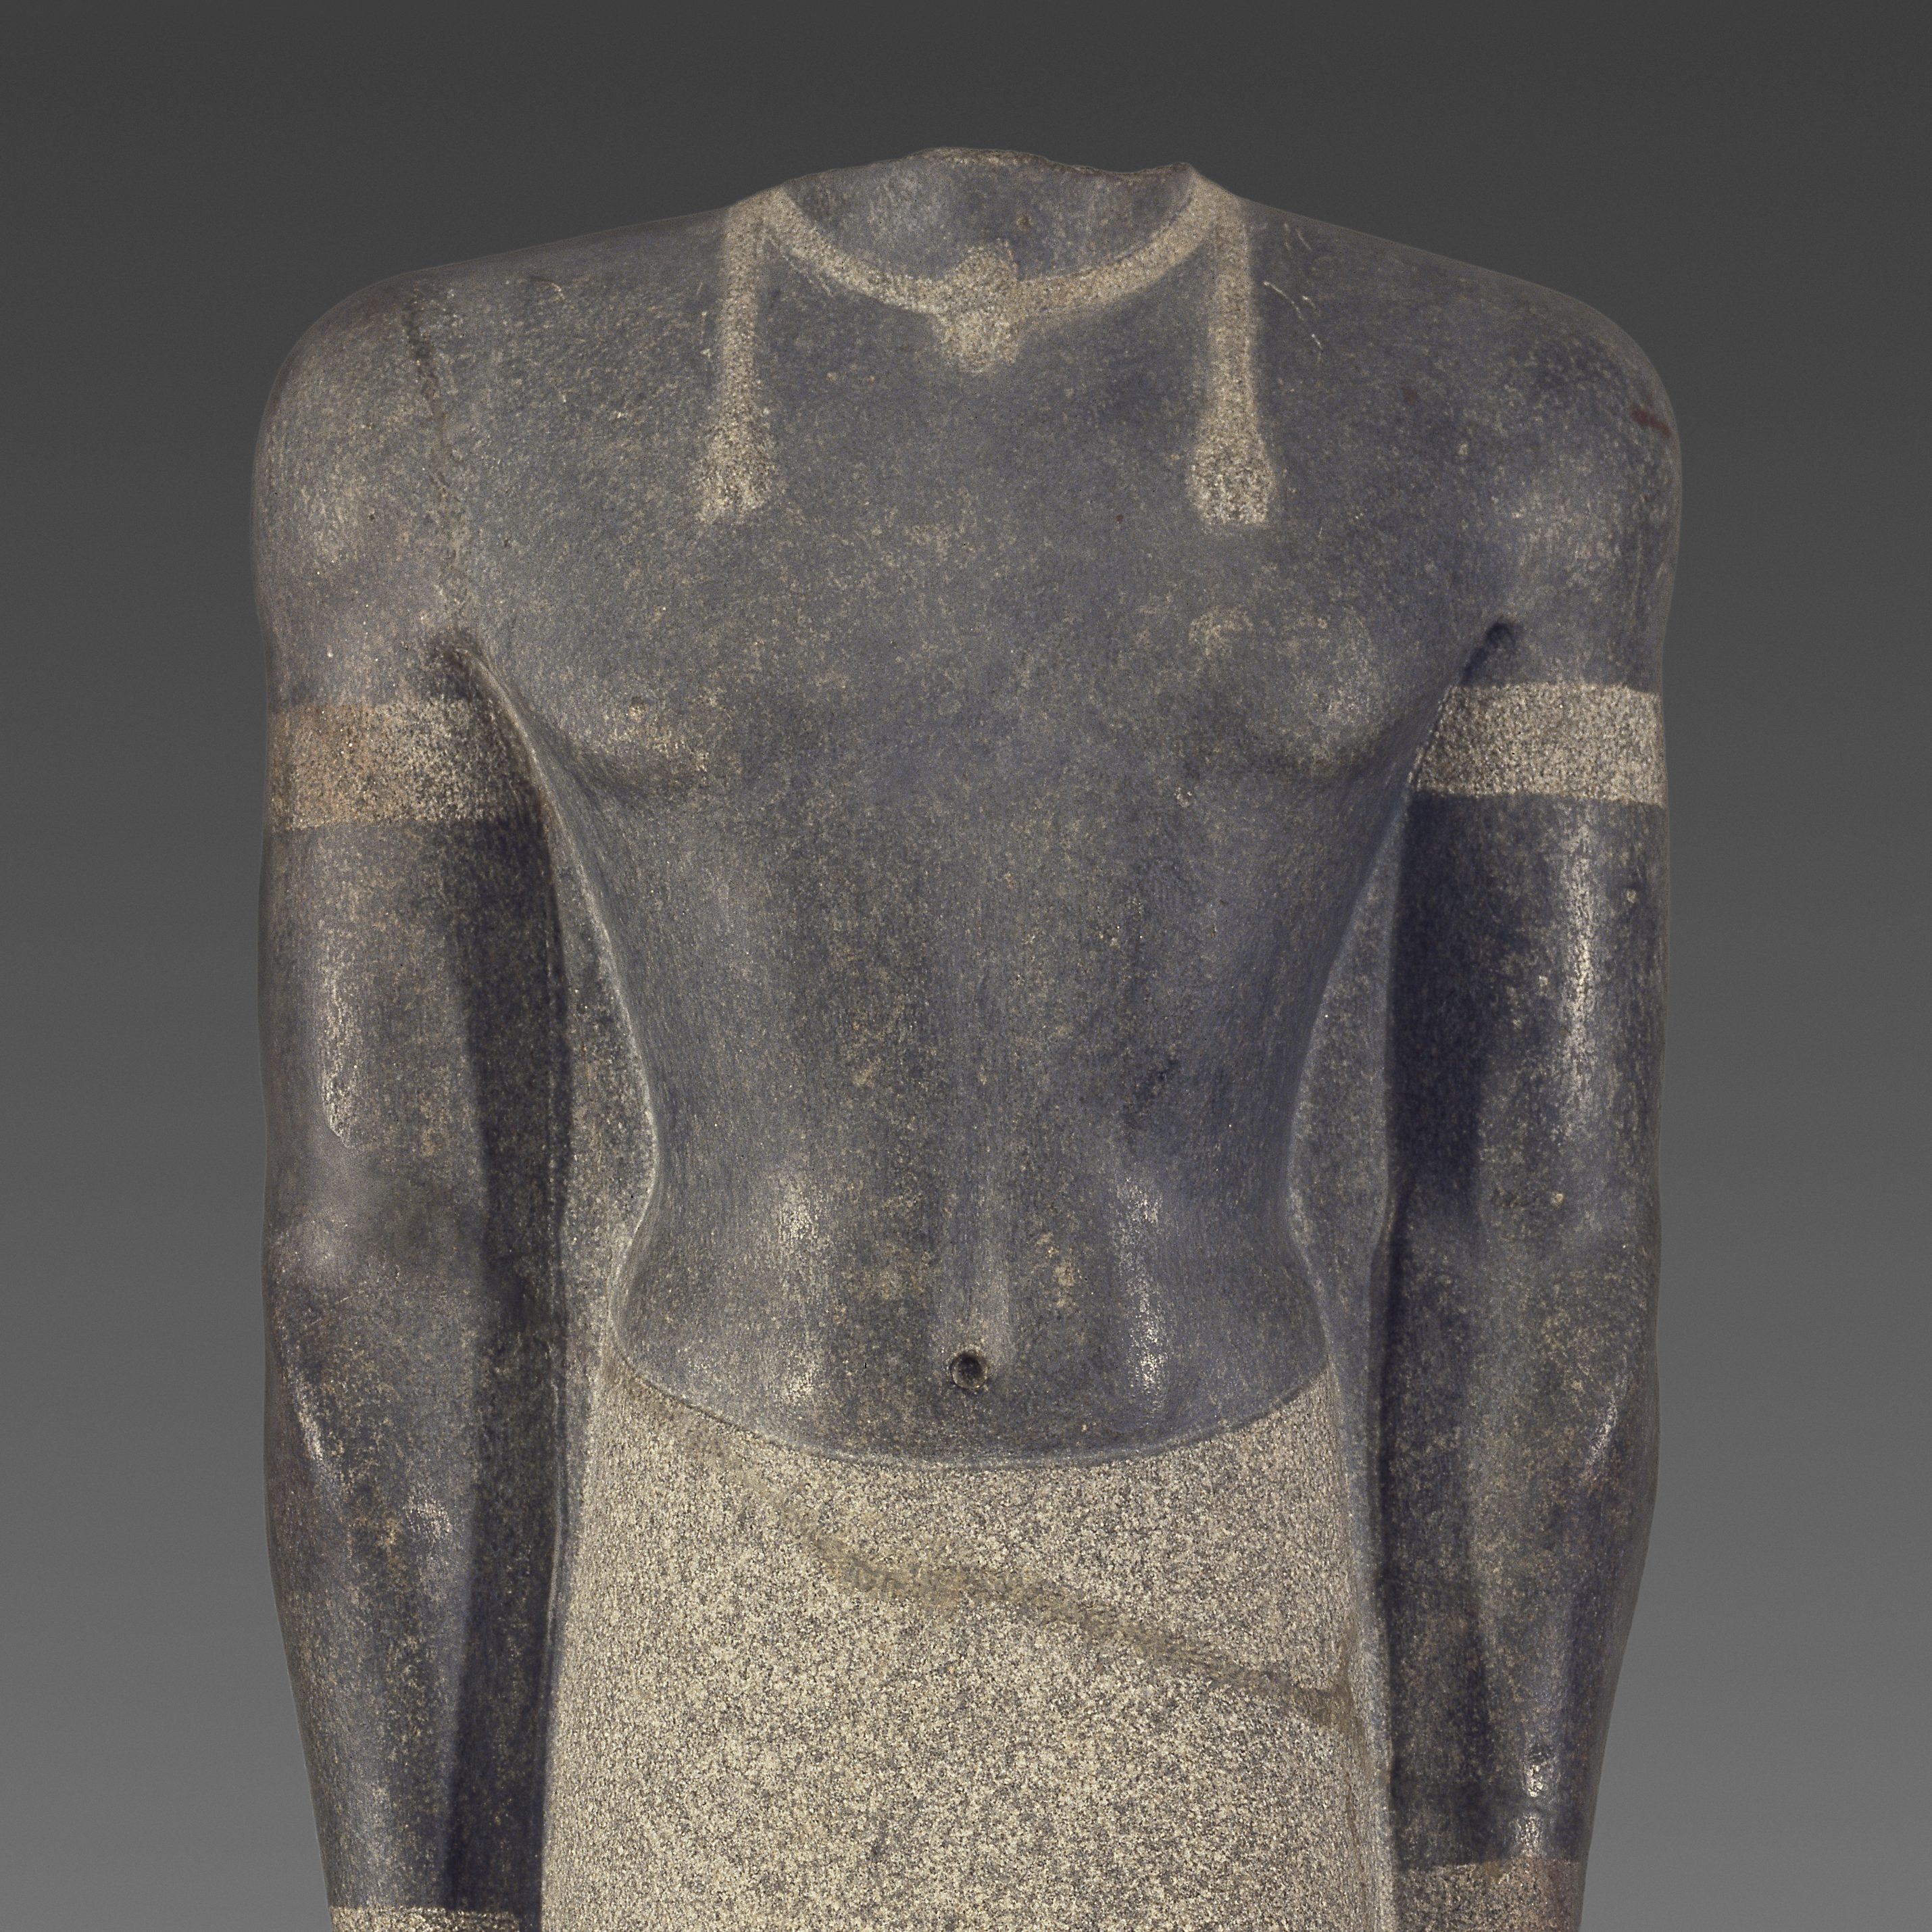 <p>Ancient Galleries, Level 2</p>
<p>This sculpture of Senkamanisken, King of Kush, originally appeared with the kilt, armbands, and jewelry covered in gold. Stand like this king. How would you describe your pose? Do you feel powerful? </p>
